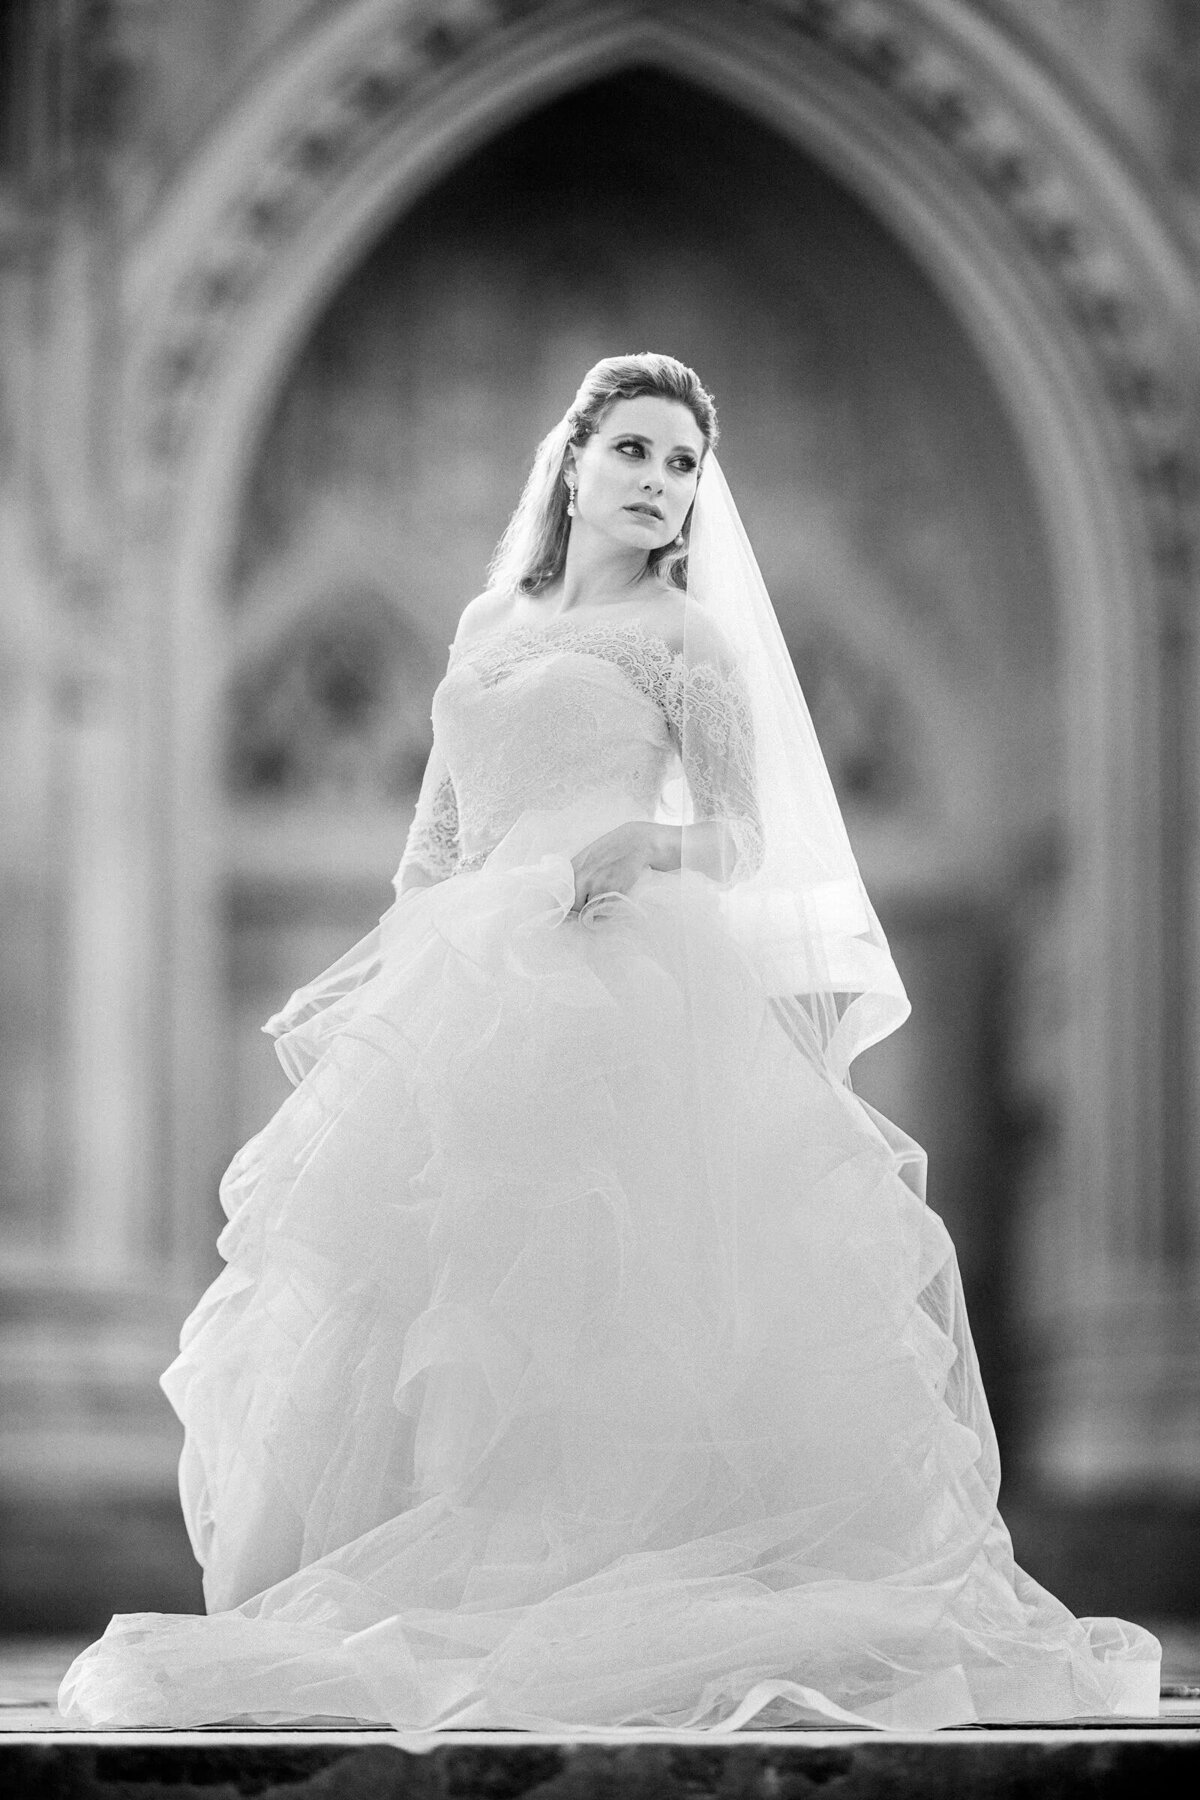 Elegant bride standing in front of an ornate doorway, her gown and veil beautifully draped